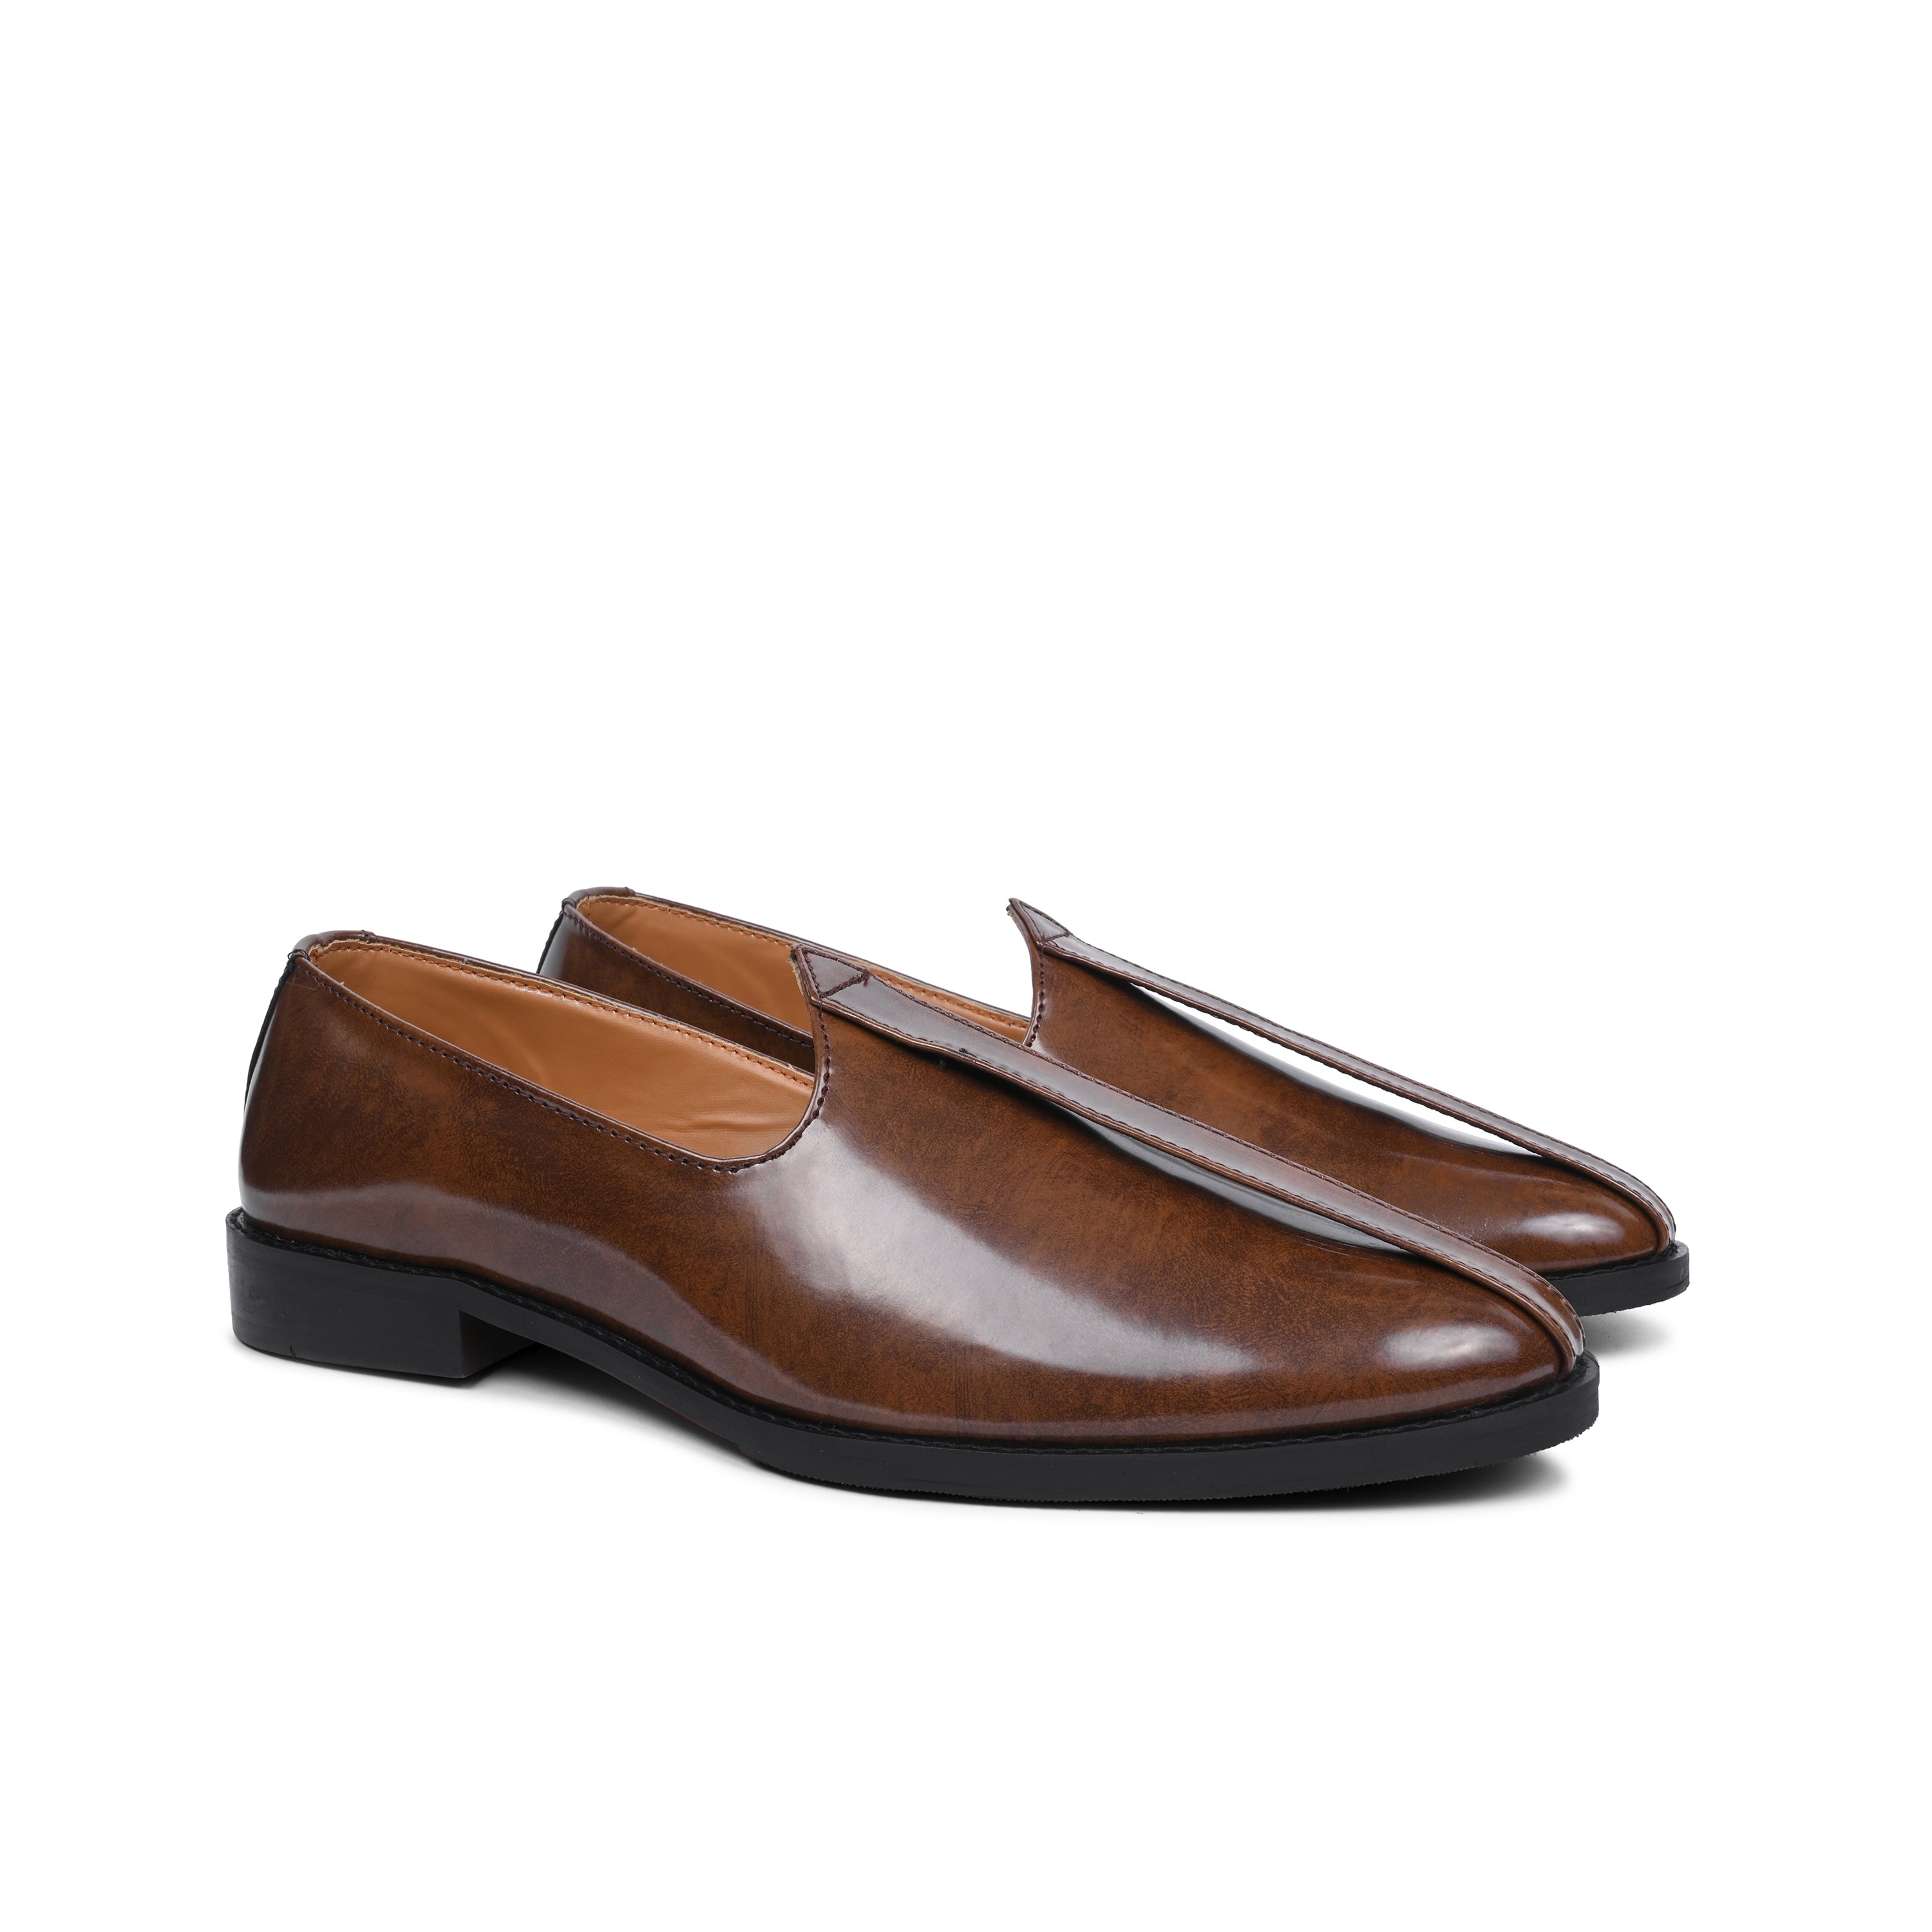 Gayle Grant Loafers